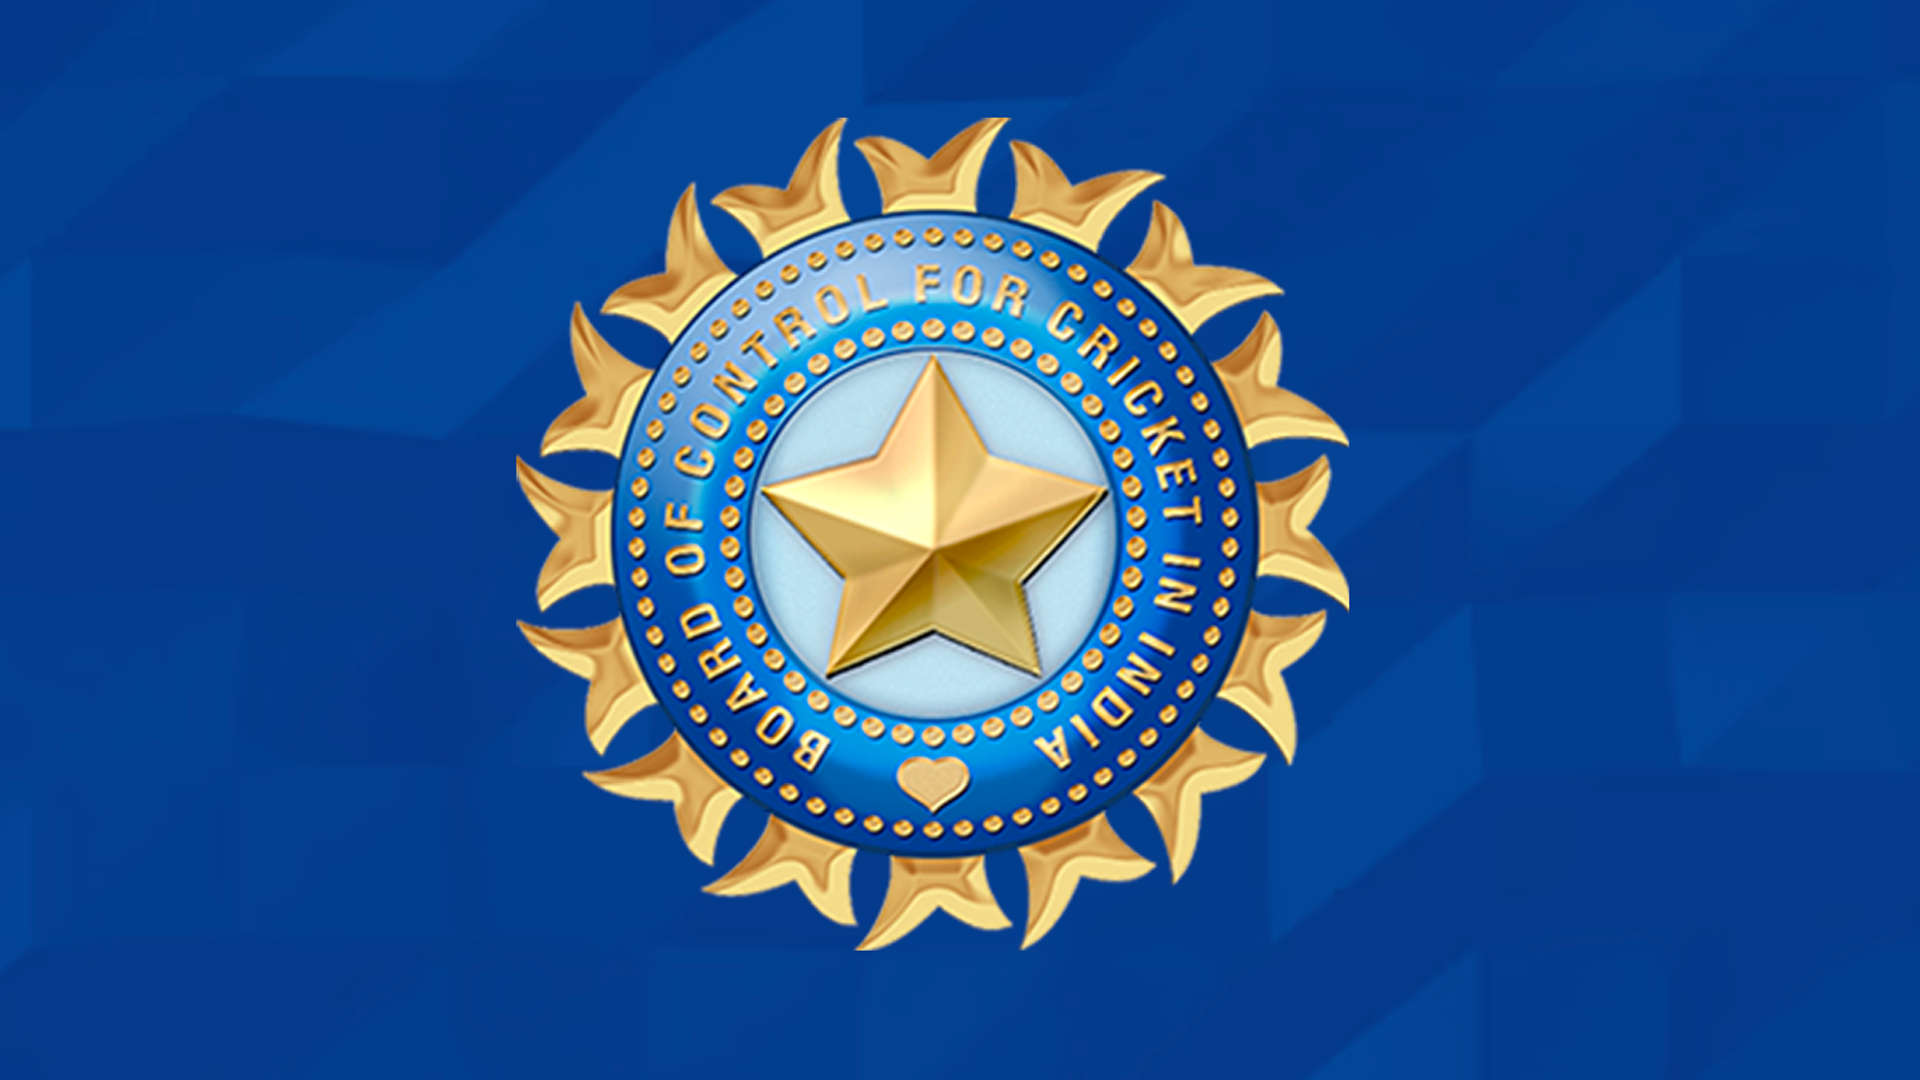 Indian Cricket Flag Photos and Images & Pictures | Shutterstock